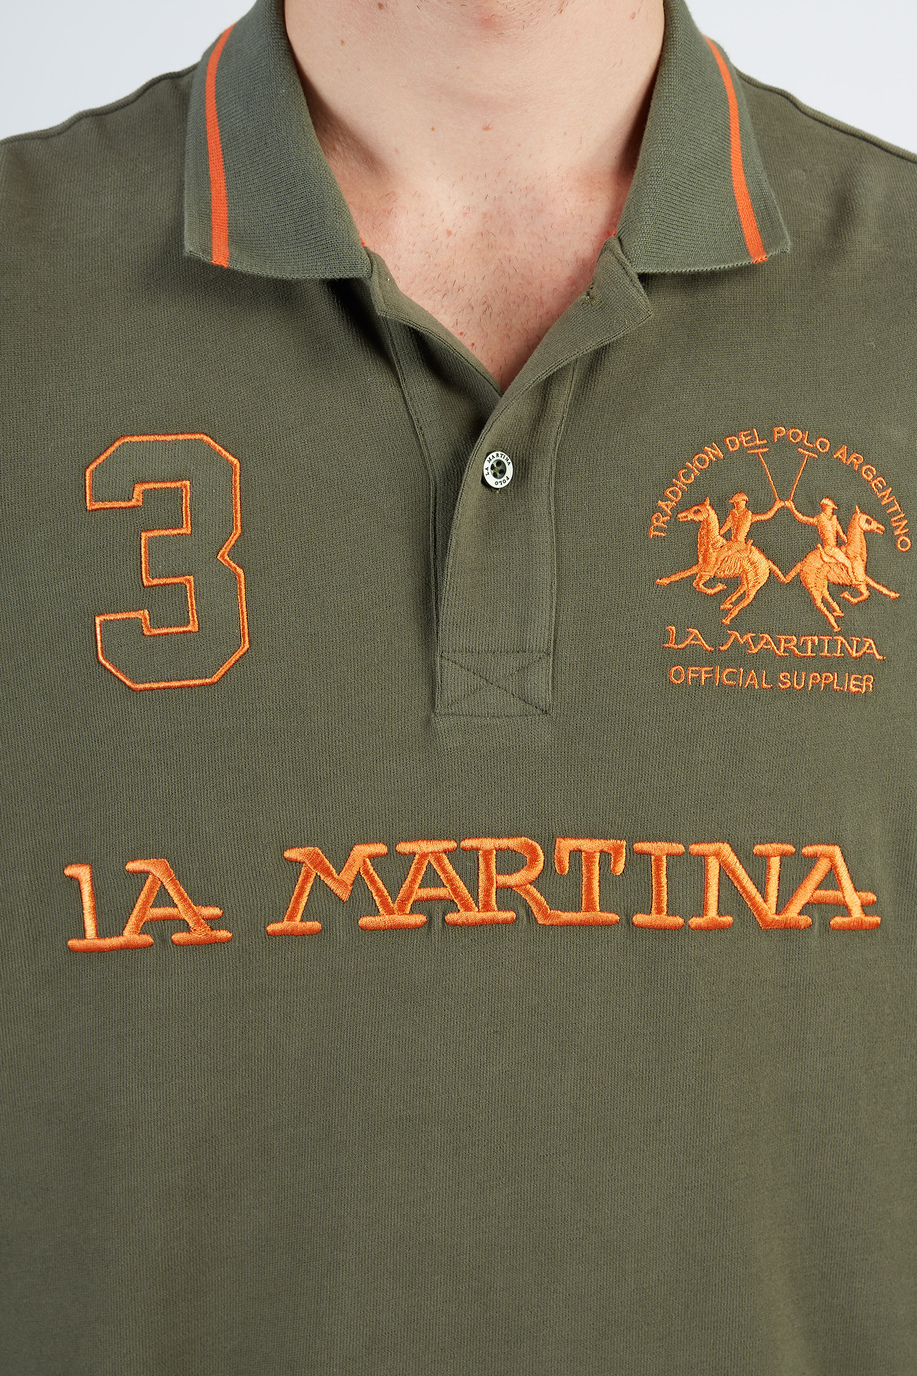 Men’s 100% regular fit cotton polo shirt with long sleeves - Polo Shirts | La Martina - Official Online Shop